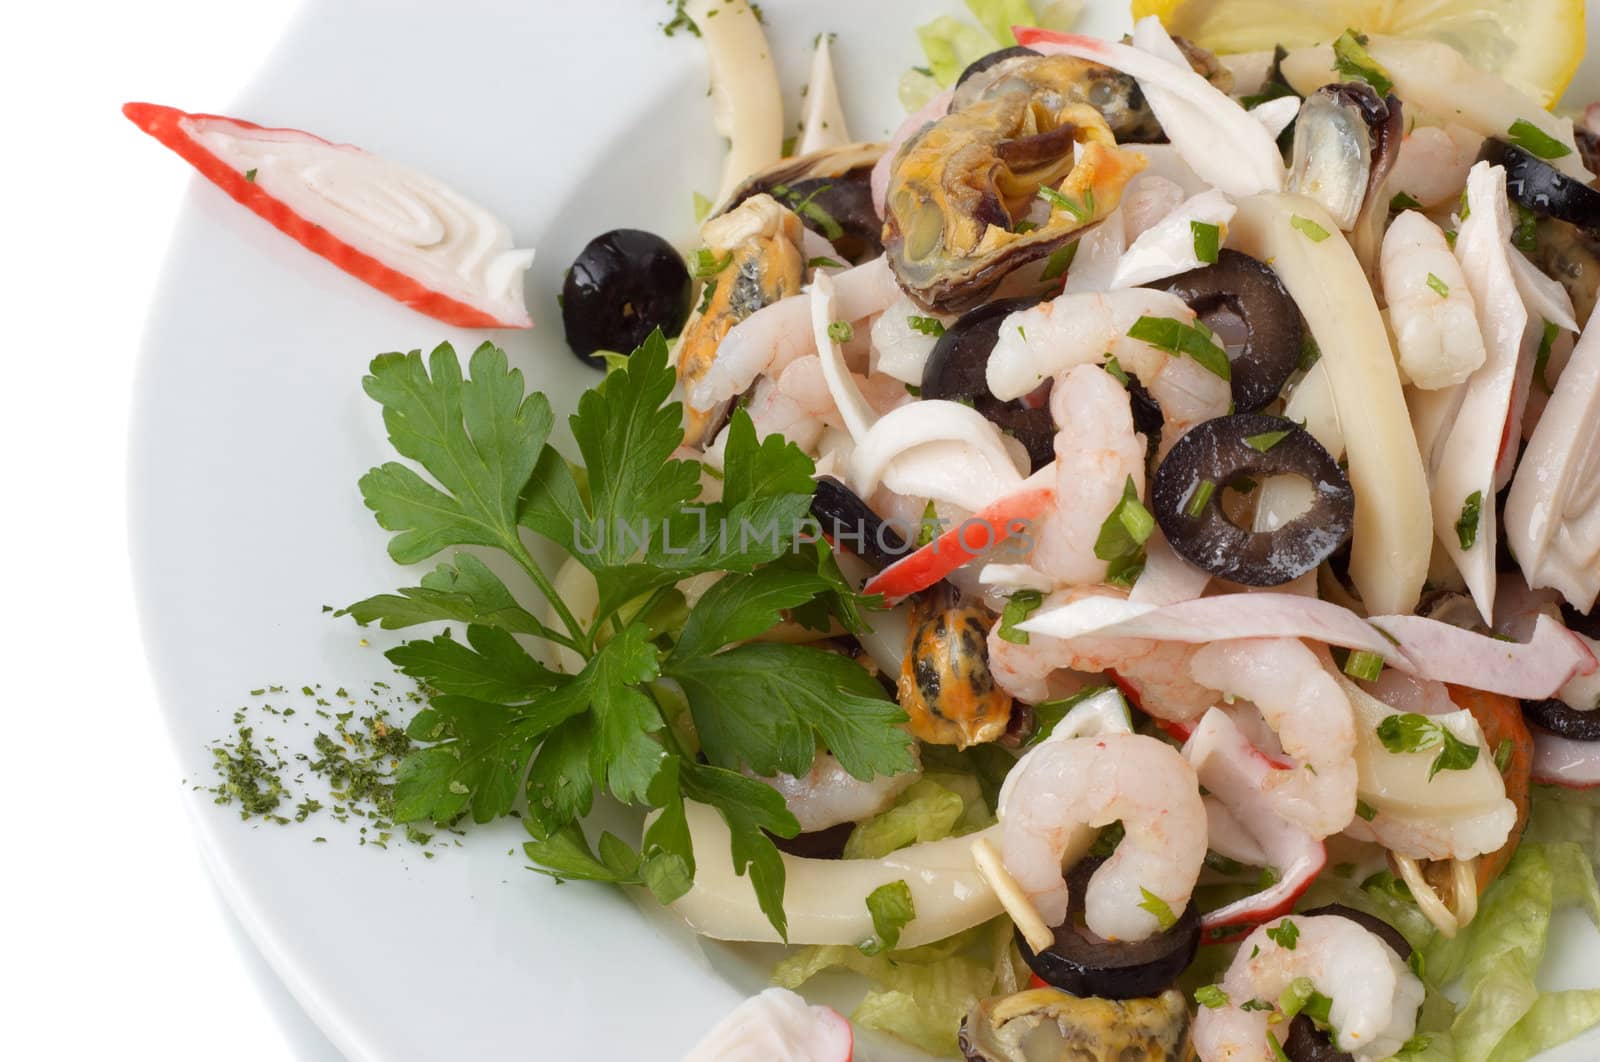 shrimp and mussel salad by starush